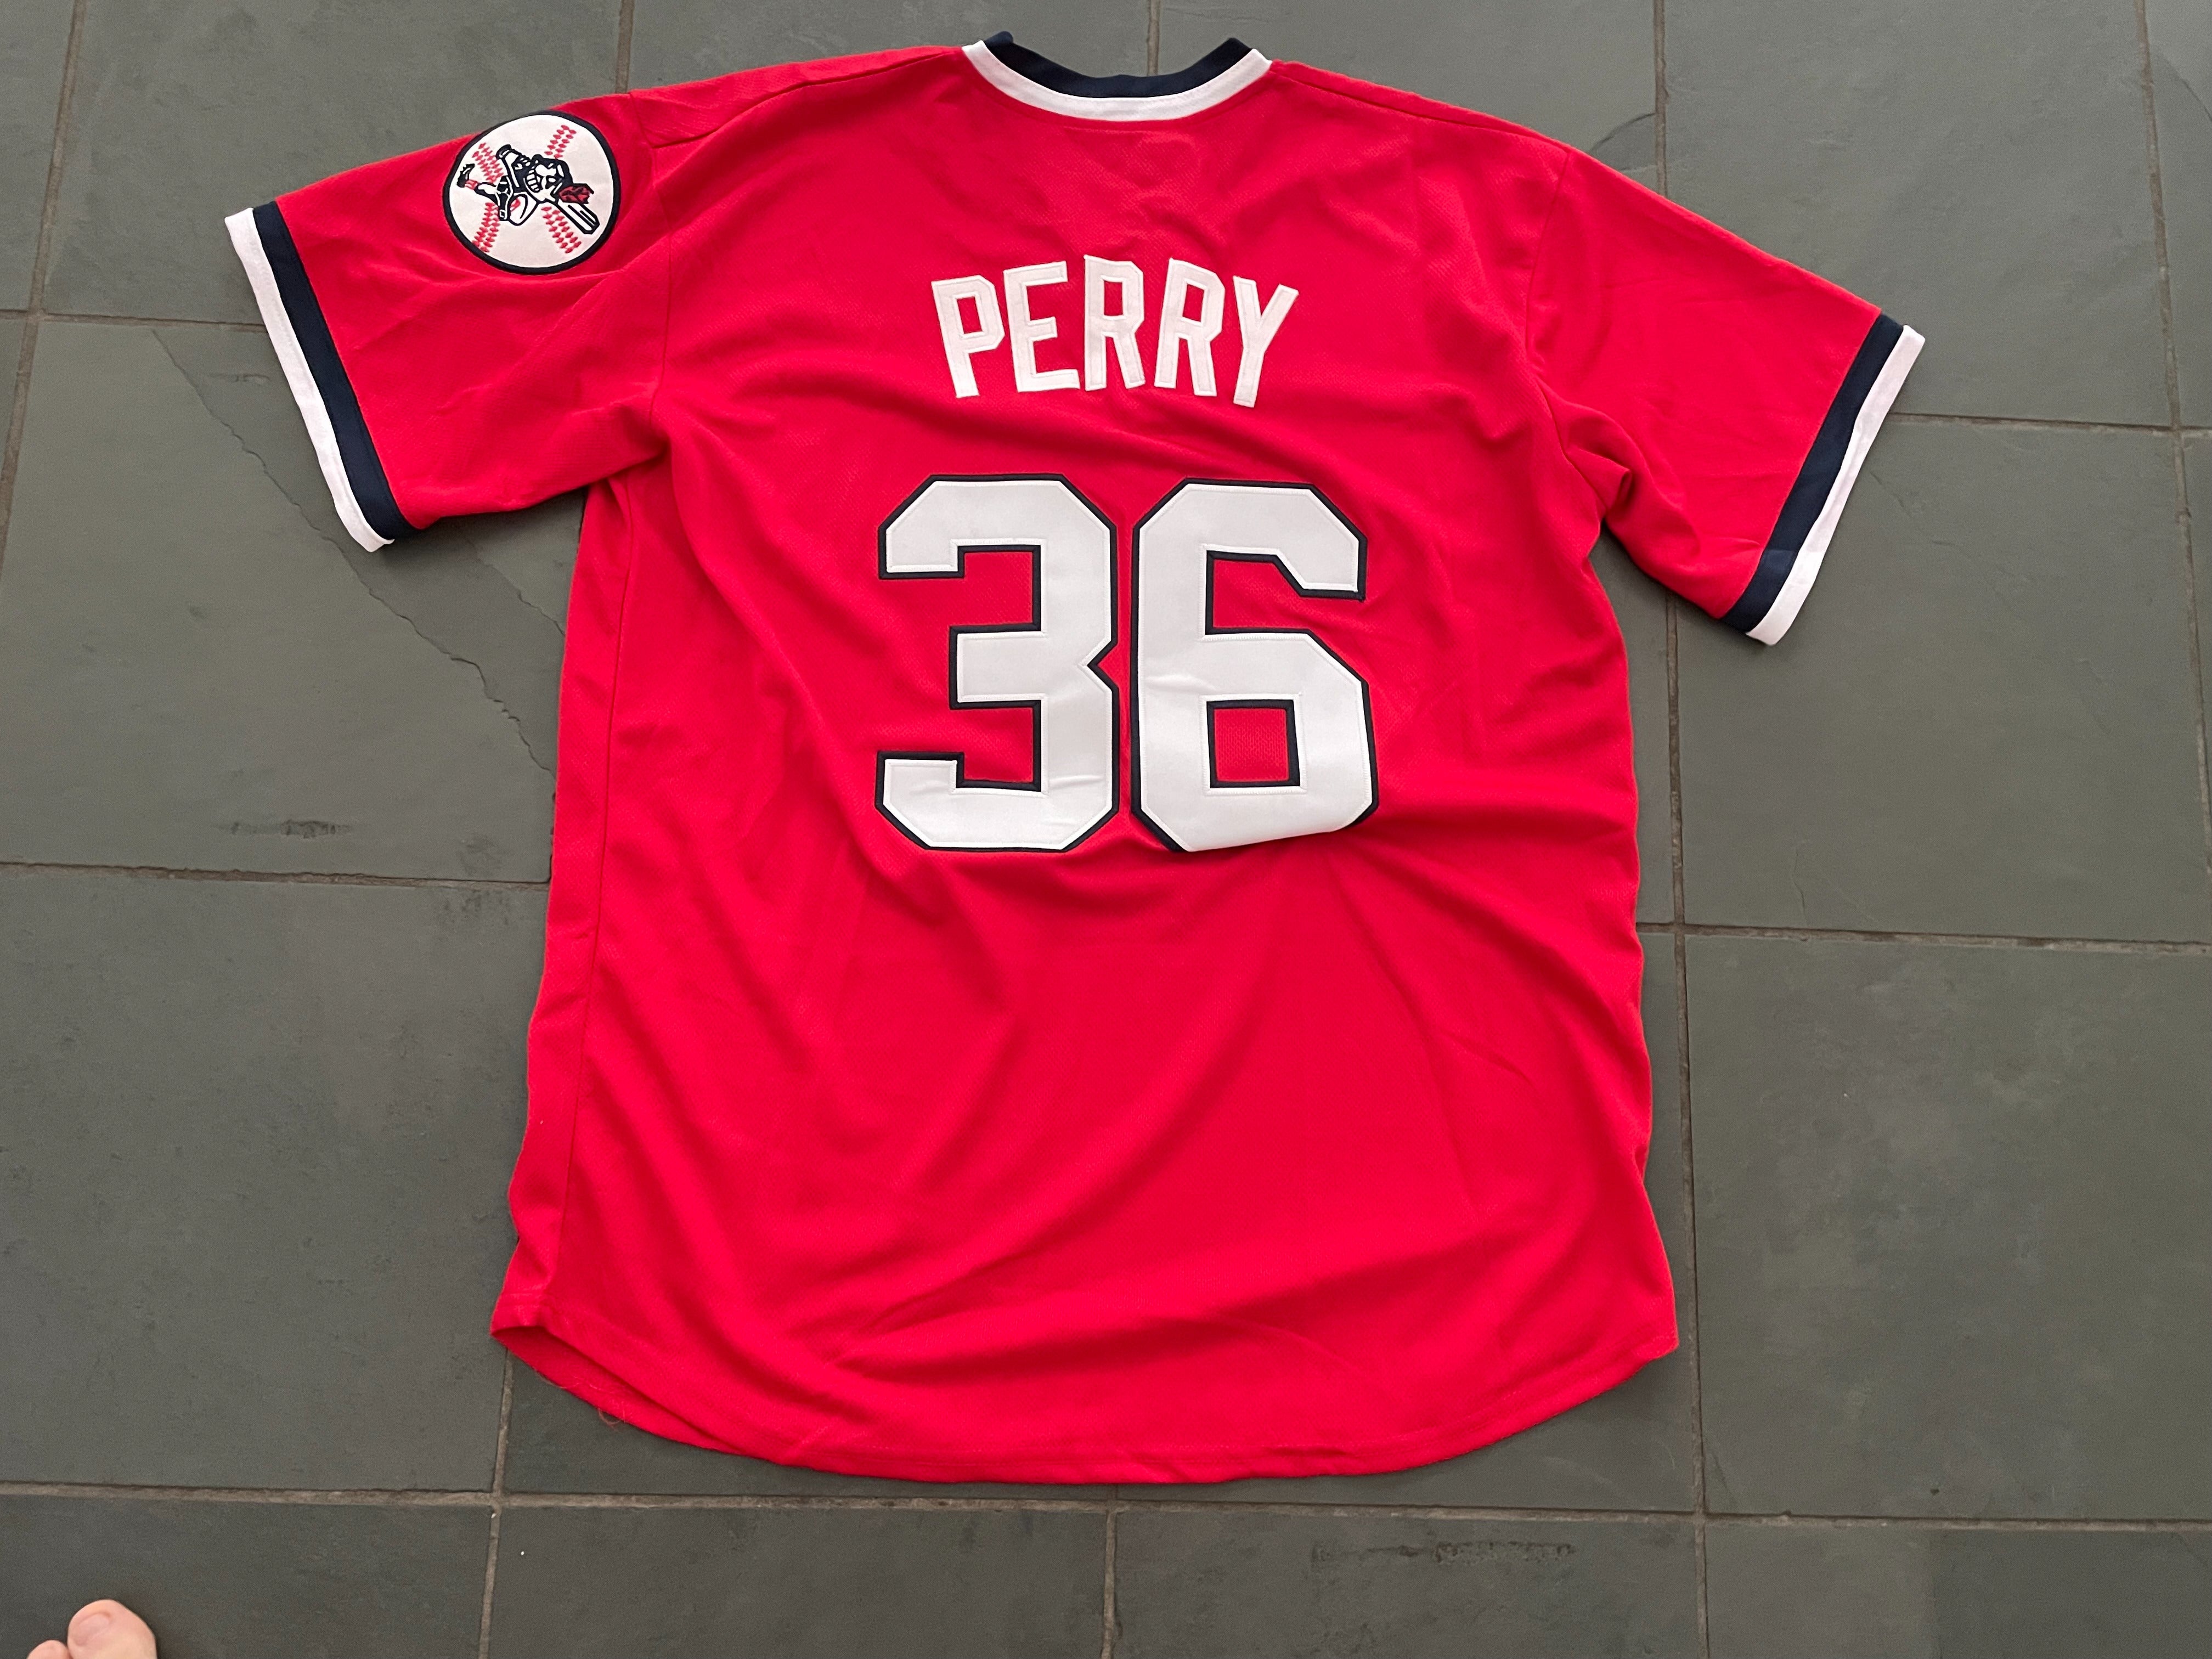 CLEVELAND INDIANS GAYLORD PERRY #36 Replica Baseball Jersey sz XL